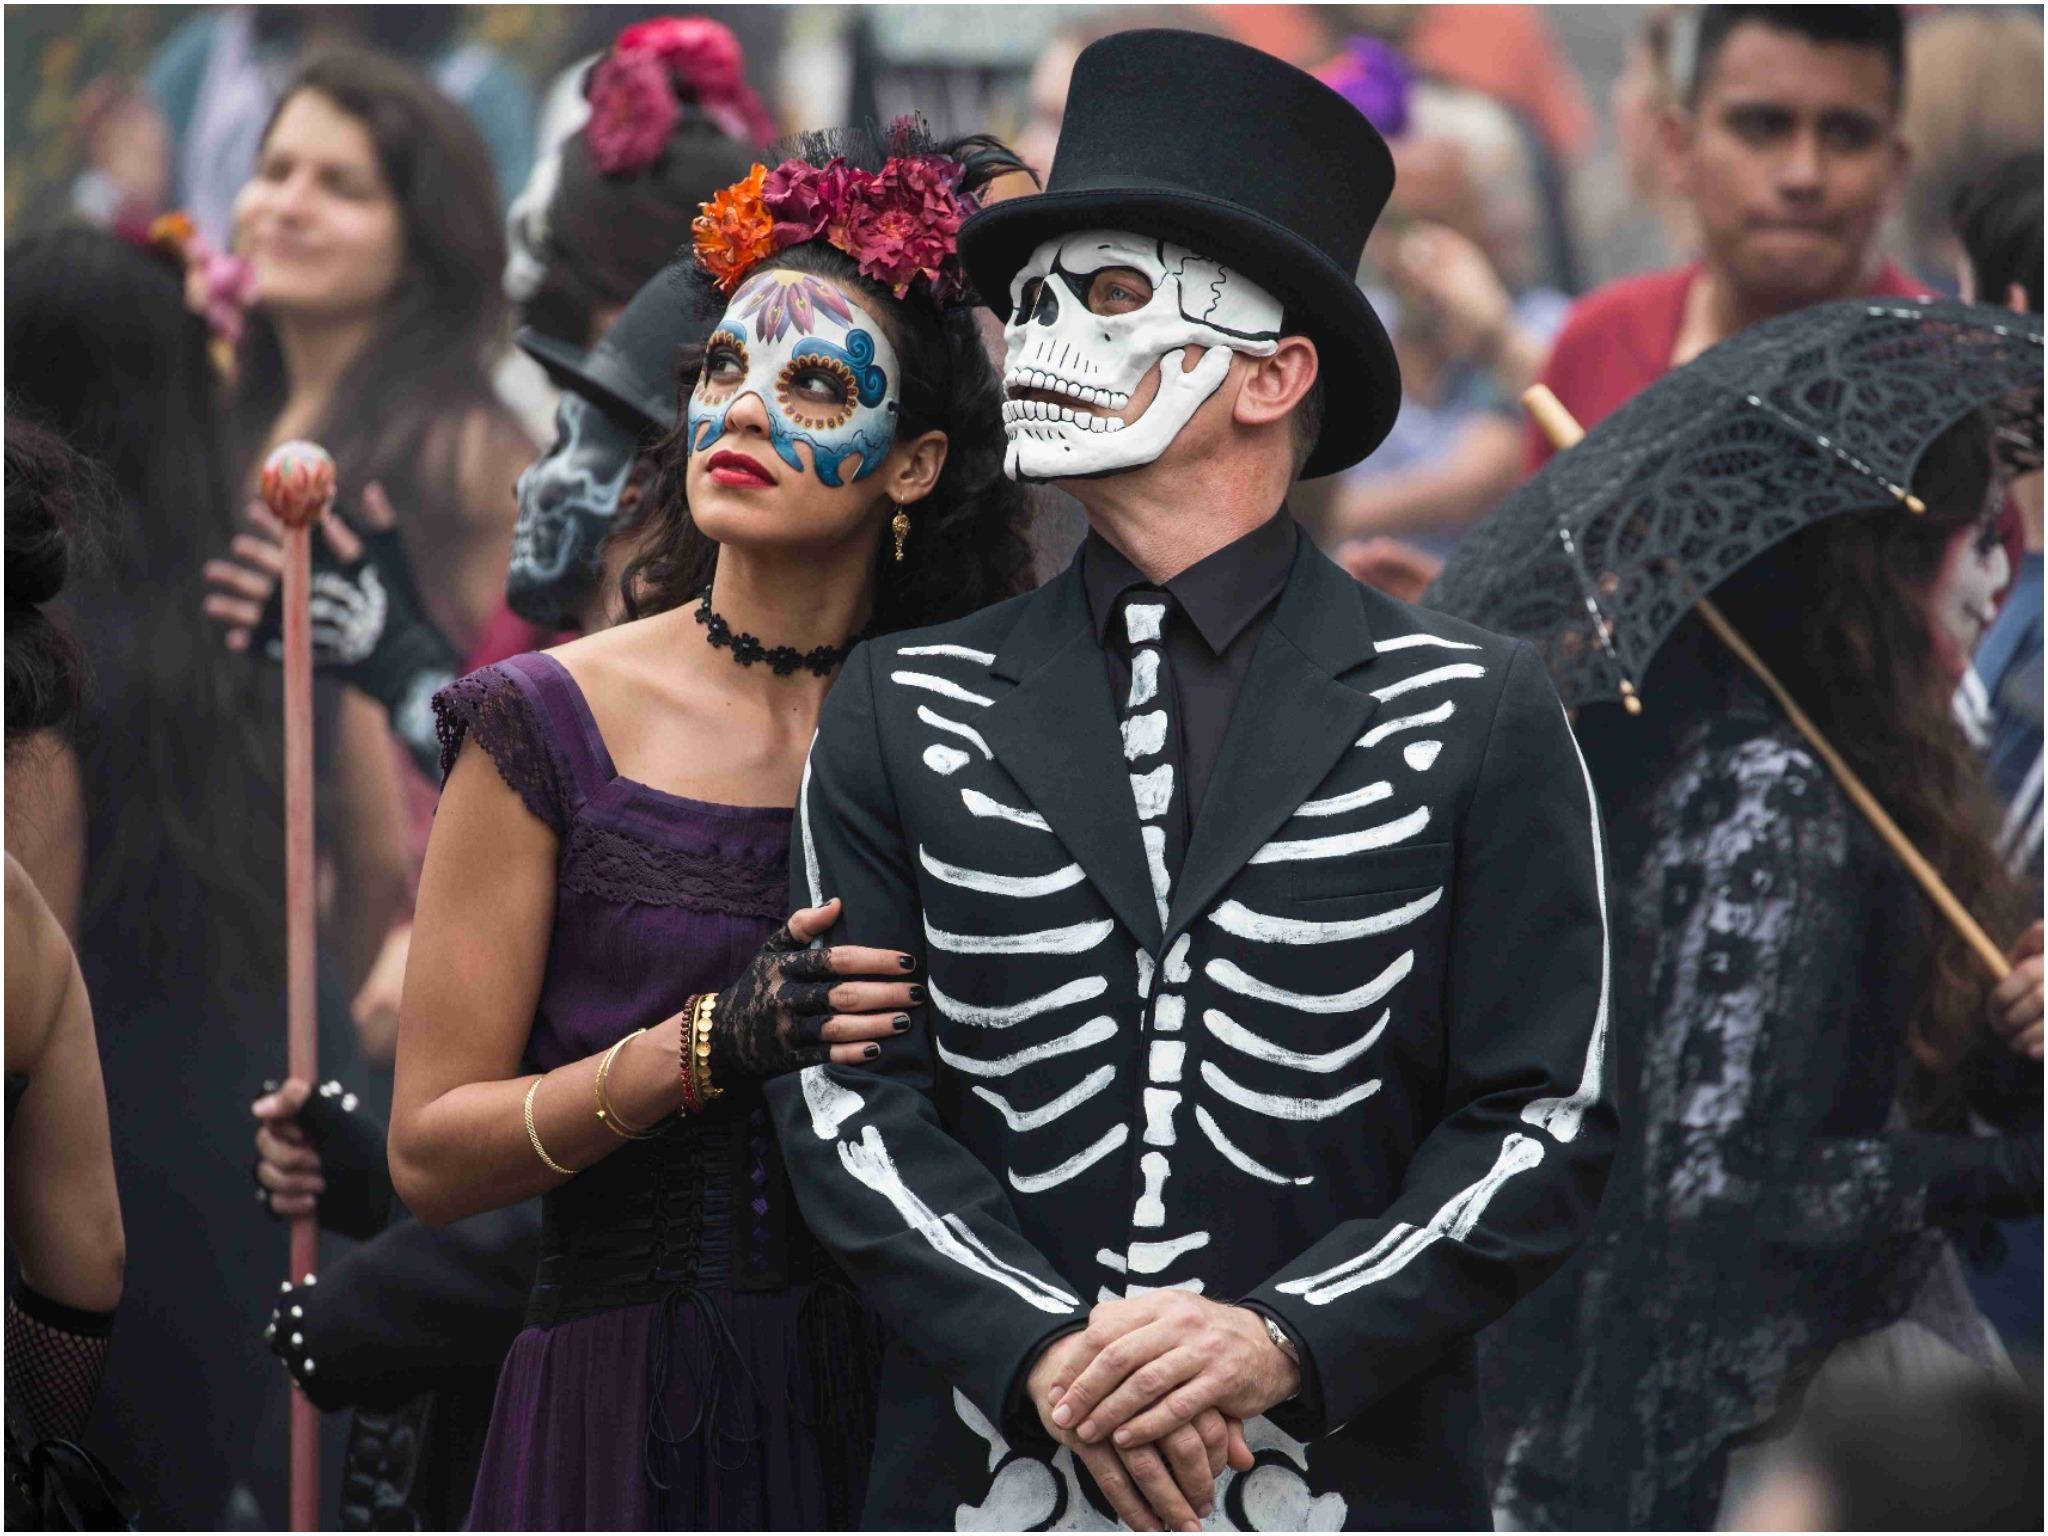 2048x1536 James Bond: Mexico City to hold first Day of the Dead parade thanks to  Spectre | The Independent